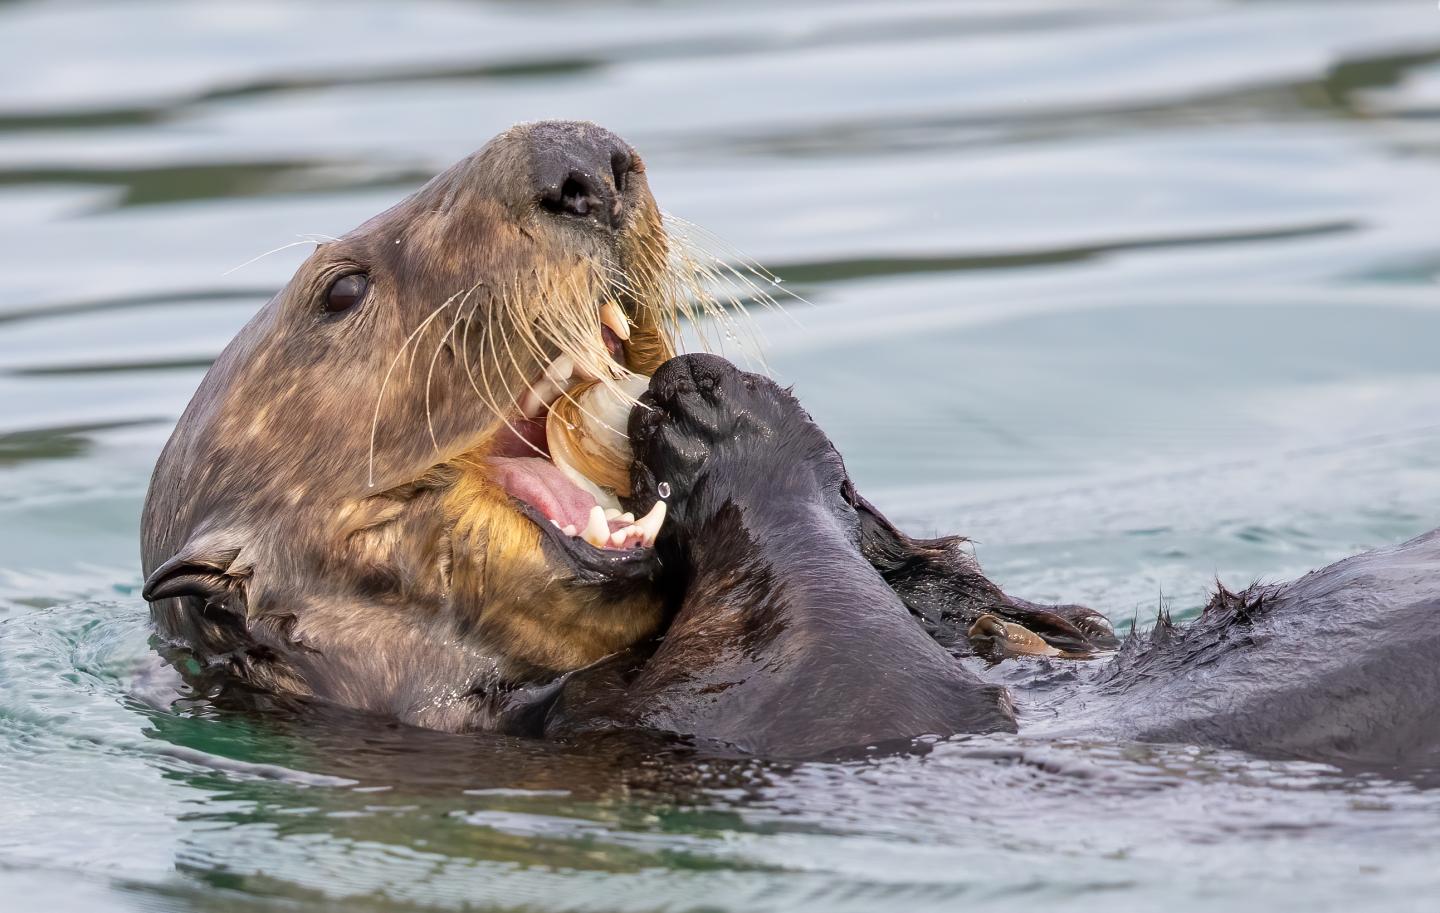 Sea otter eating clam